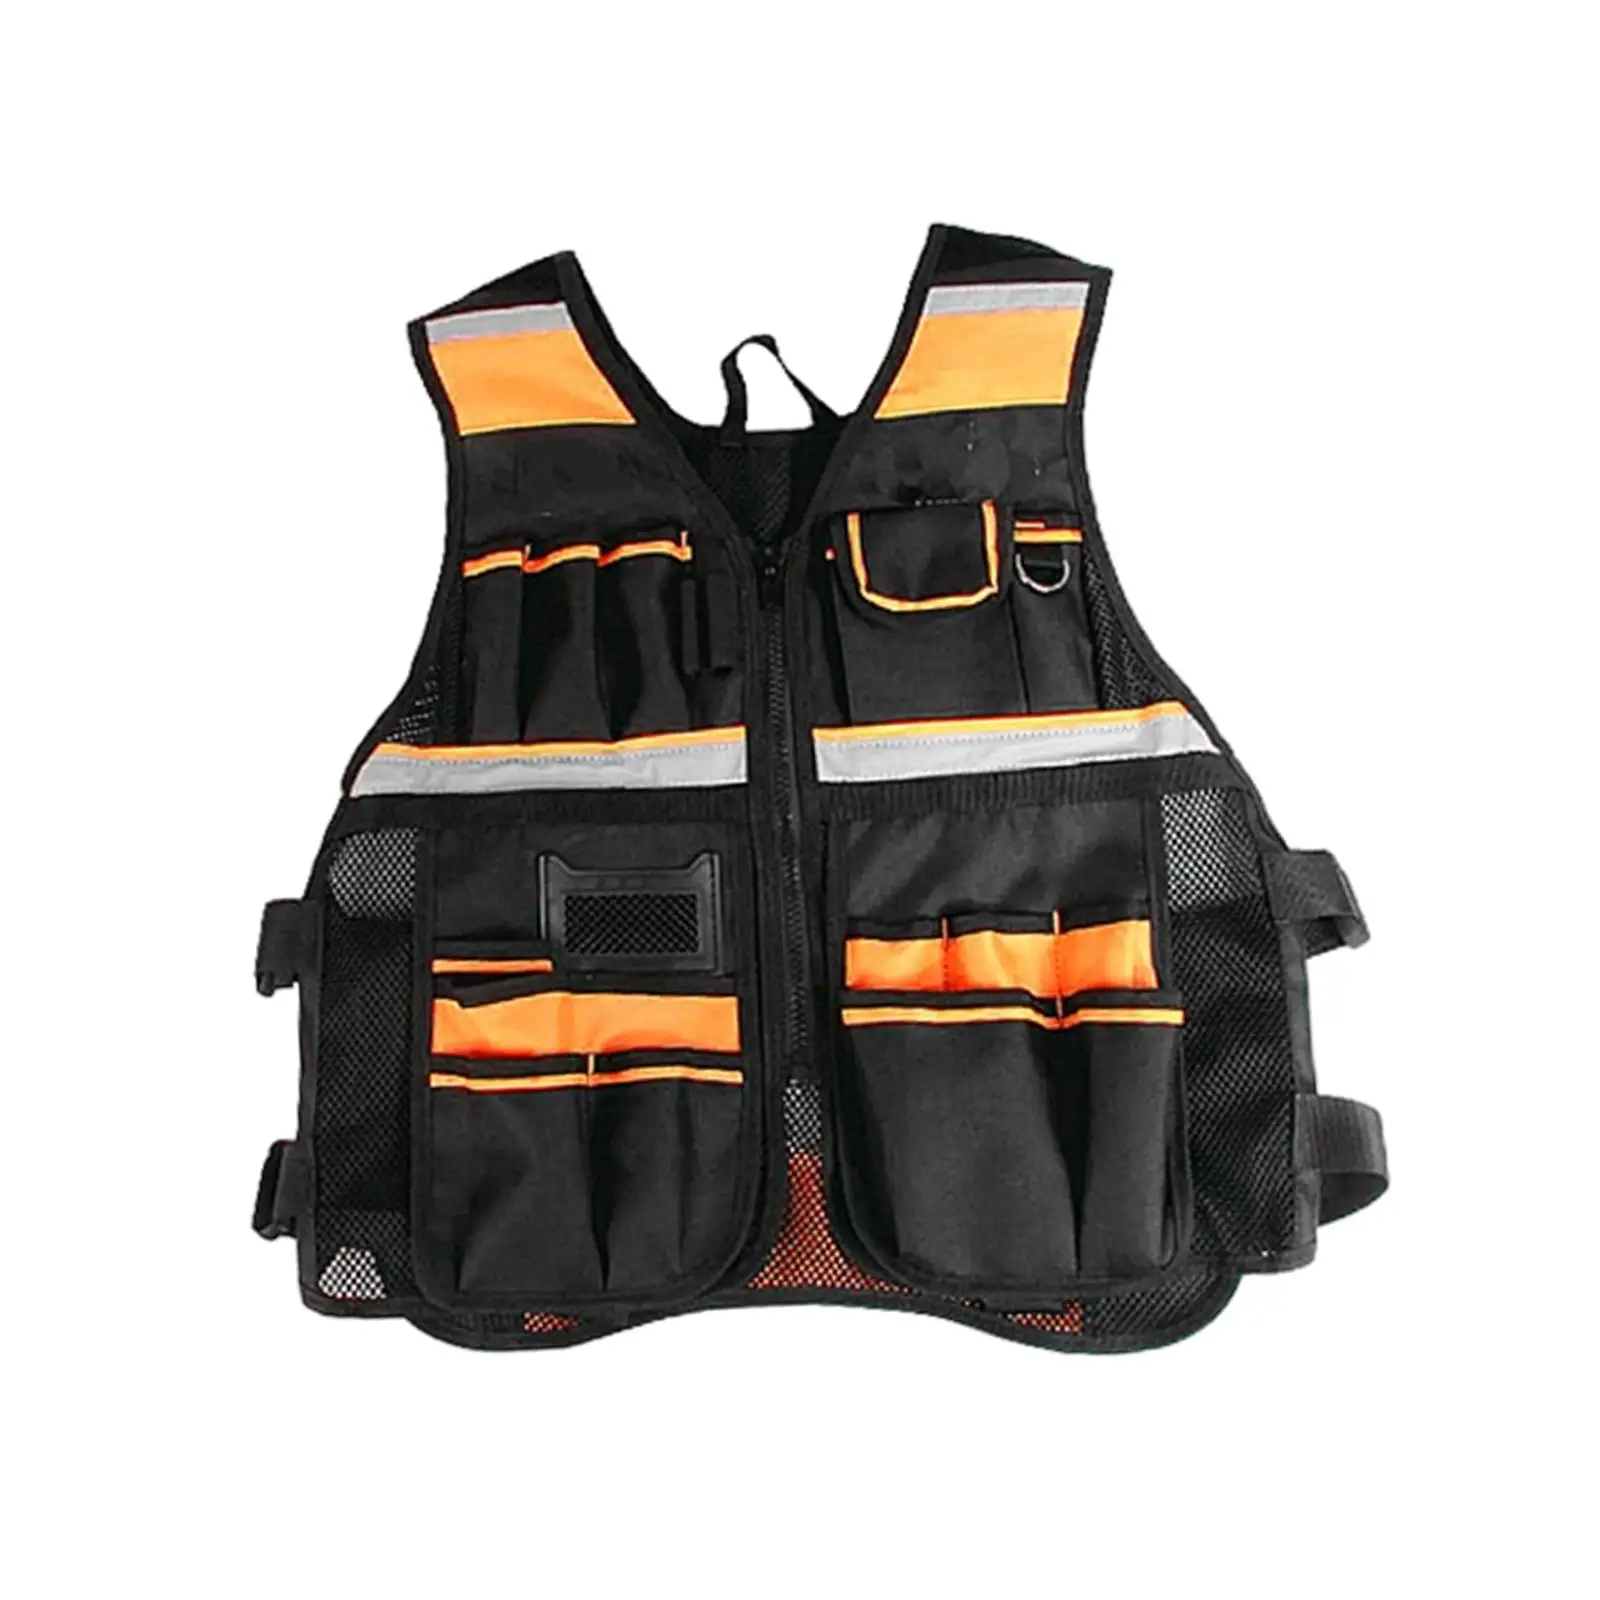 Safety Tool Vest Reflective Electrician Carpenters Work Vest for Men with Pockets Workwear for Industrial Household Construction